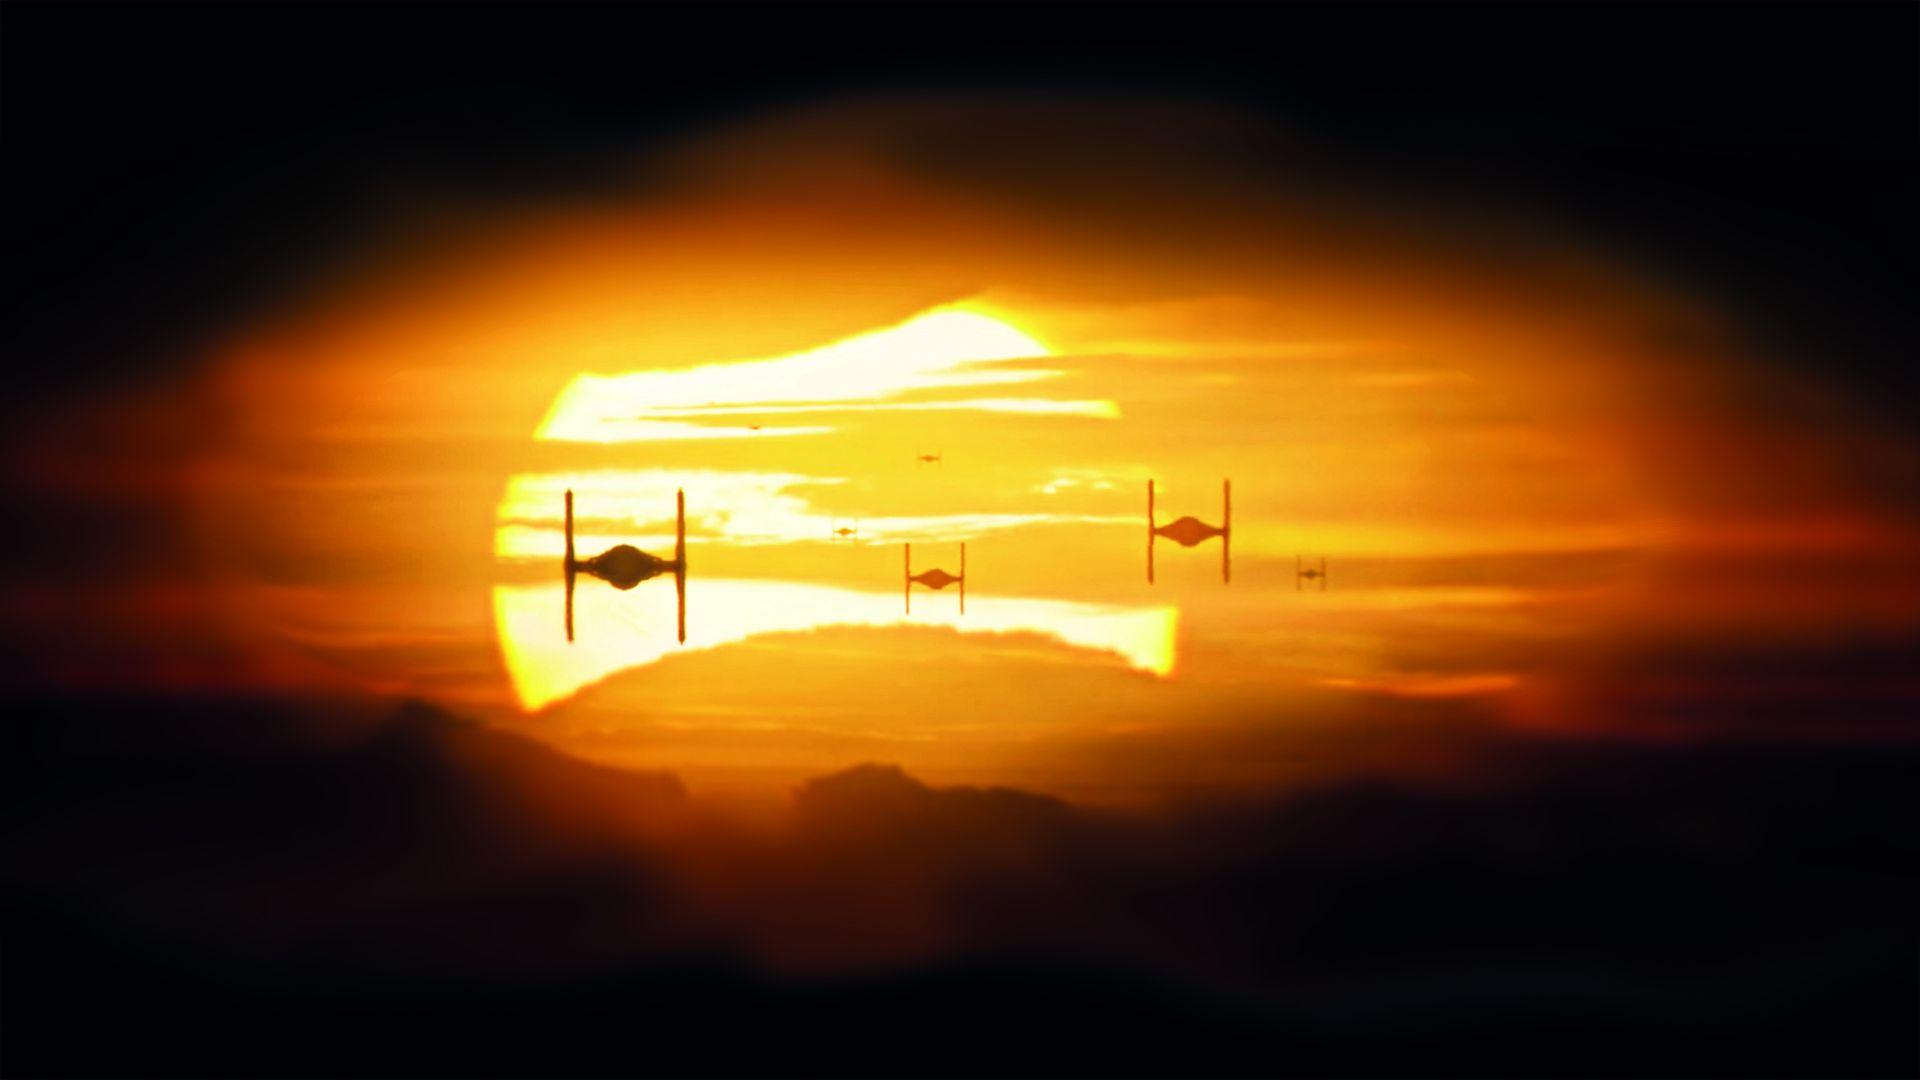 Star Wars The Force Awakens TIE Fighters Background